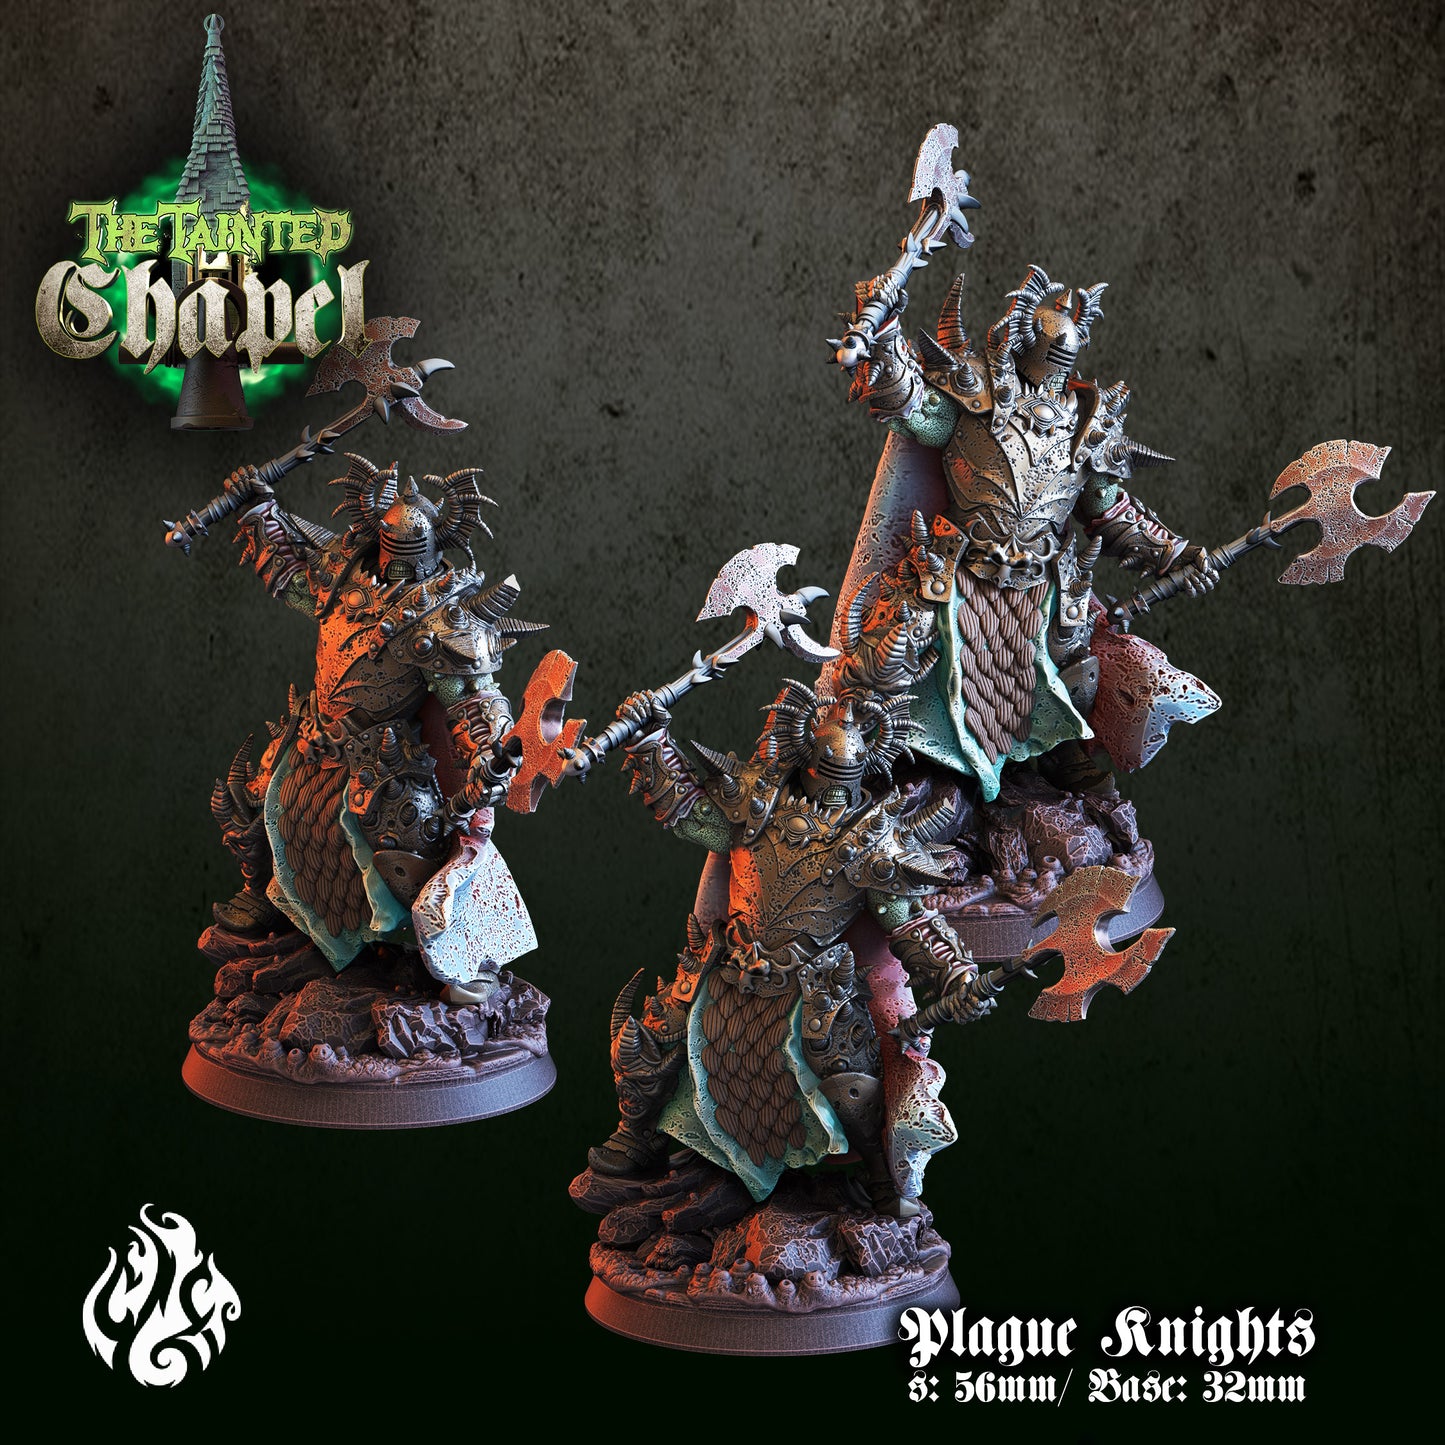 The Plague Knights - The Tainted Chapel Series from Crippled God Foundry - Table-top gaming mini and collectable for painting.